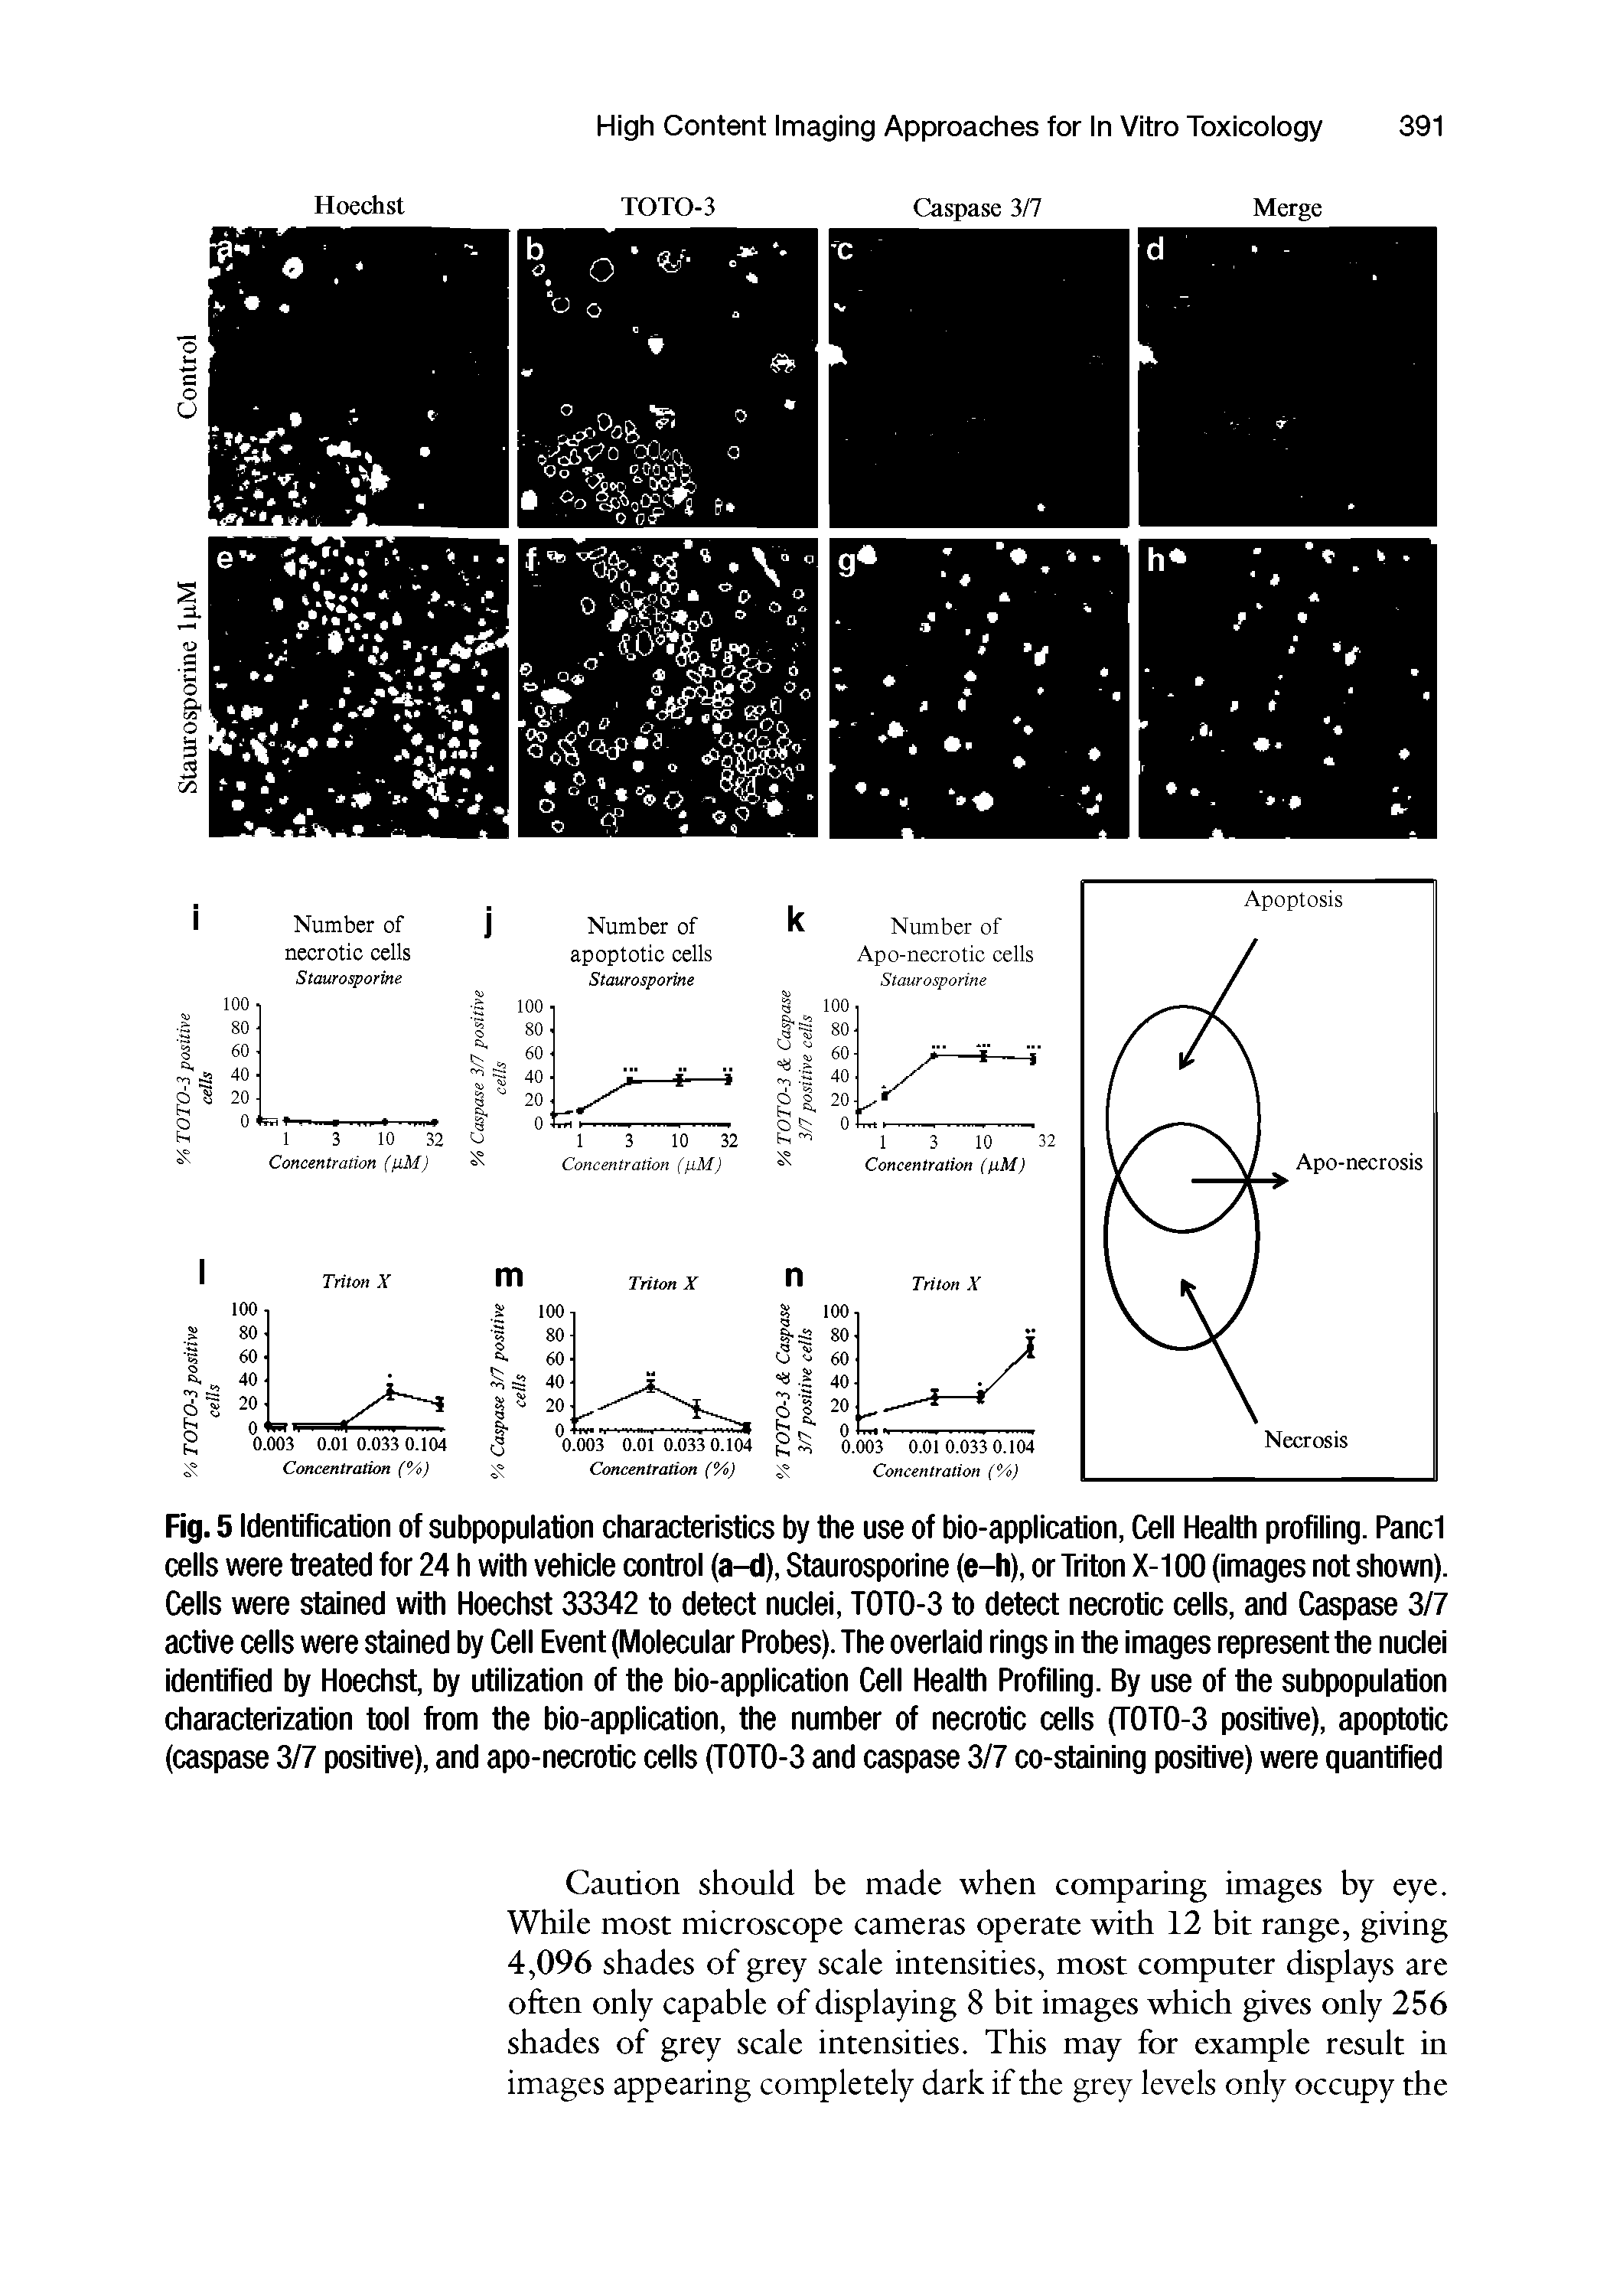 Fig. 5 Identification of subpopulation characteristics by the use of bio-application, Cell Health profiling. Panel cells were treated for 24 h with vehicle control (a—d), Staurosporine (e-h), or Triton X-100 (images not shown). Cells were stained with Hoechst 33342 to detect nuclei, TOTO-3 to detect necrotic cells, and Caspase 3/7 active cells were stained by Cell Event (Molecular Probes). The overlaid rings in the images represent the nuclei identified by Hoechst, by utilization of the bio-application Cell Health Profiling. By use of the subpopulation characterization tool from the bio-application, the number of necrotic cells (TOTO-3 positive), apoptotic (caspase 3/7 positive), and apo-necrotic cells (TOTO-3 and caspase 3/7 co-staining positive) were quantified...